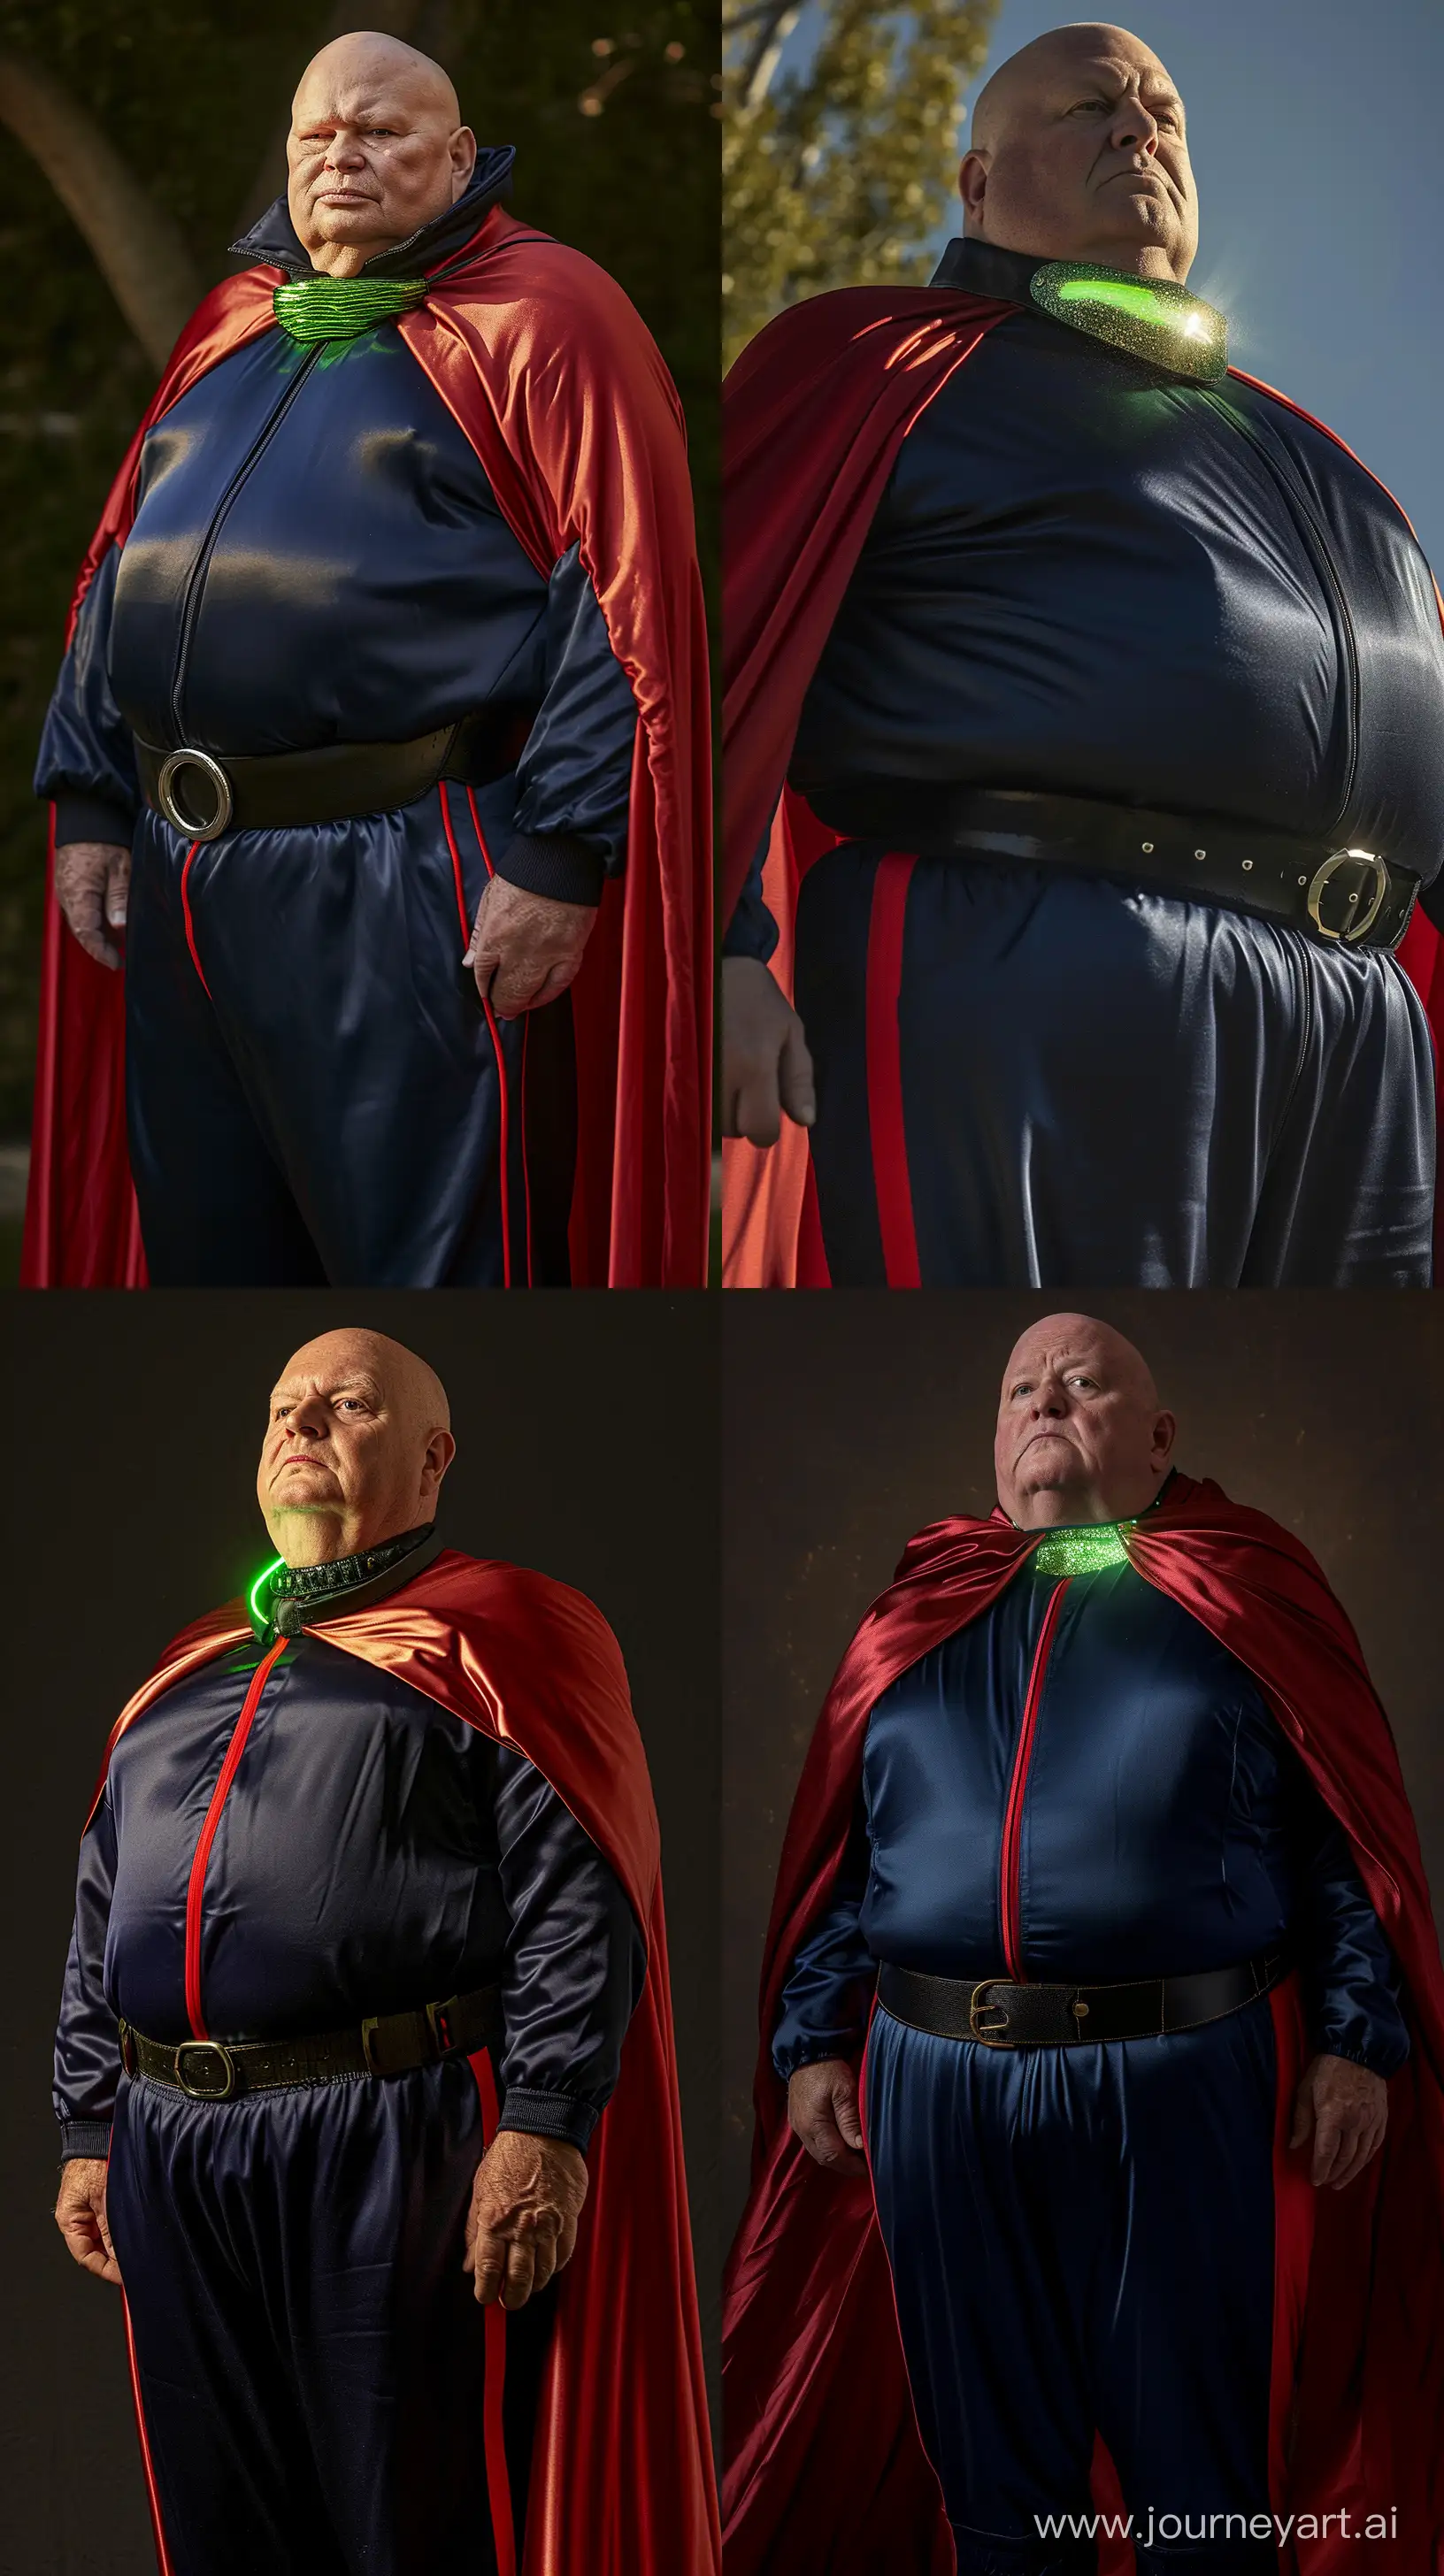 Stylish-70YearOld-Man-in-Glowing-Green-Collar-and-Red-Cape